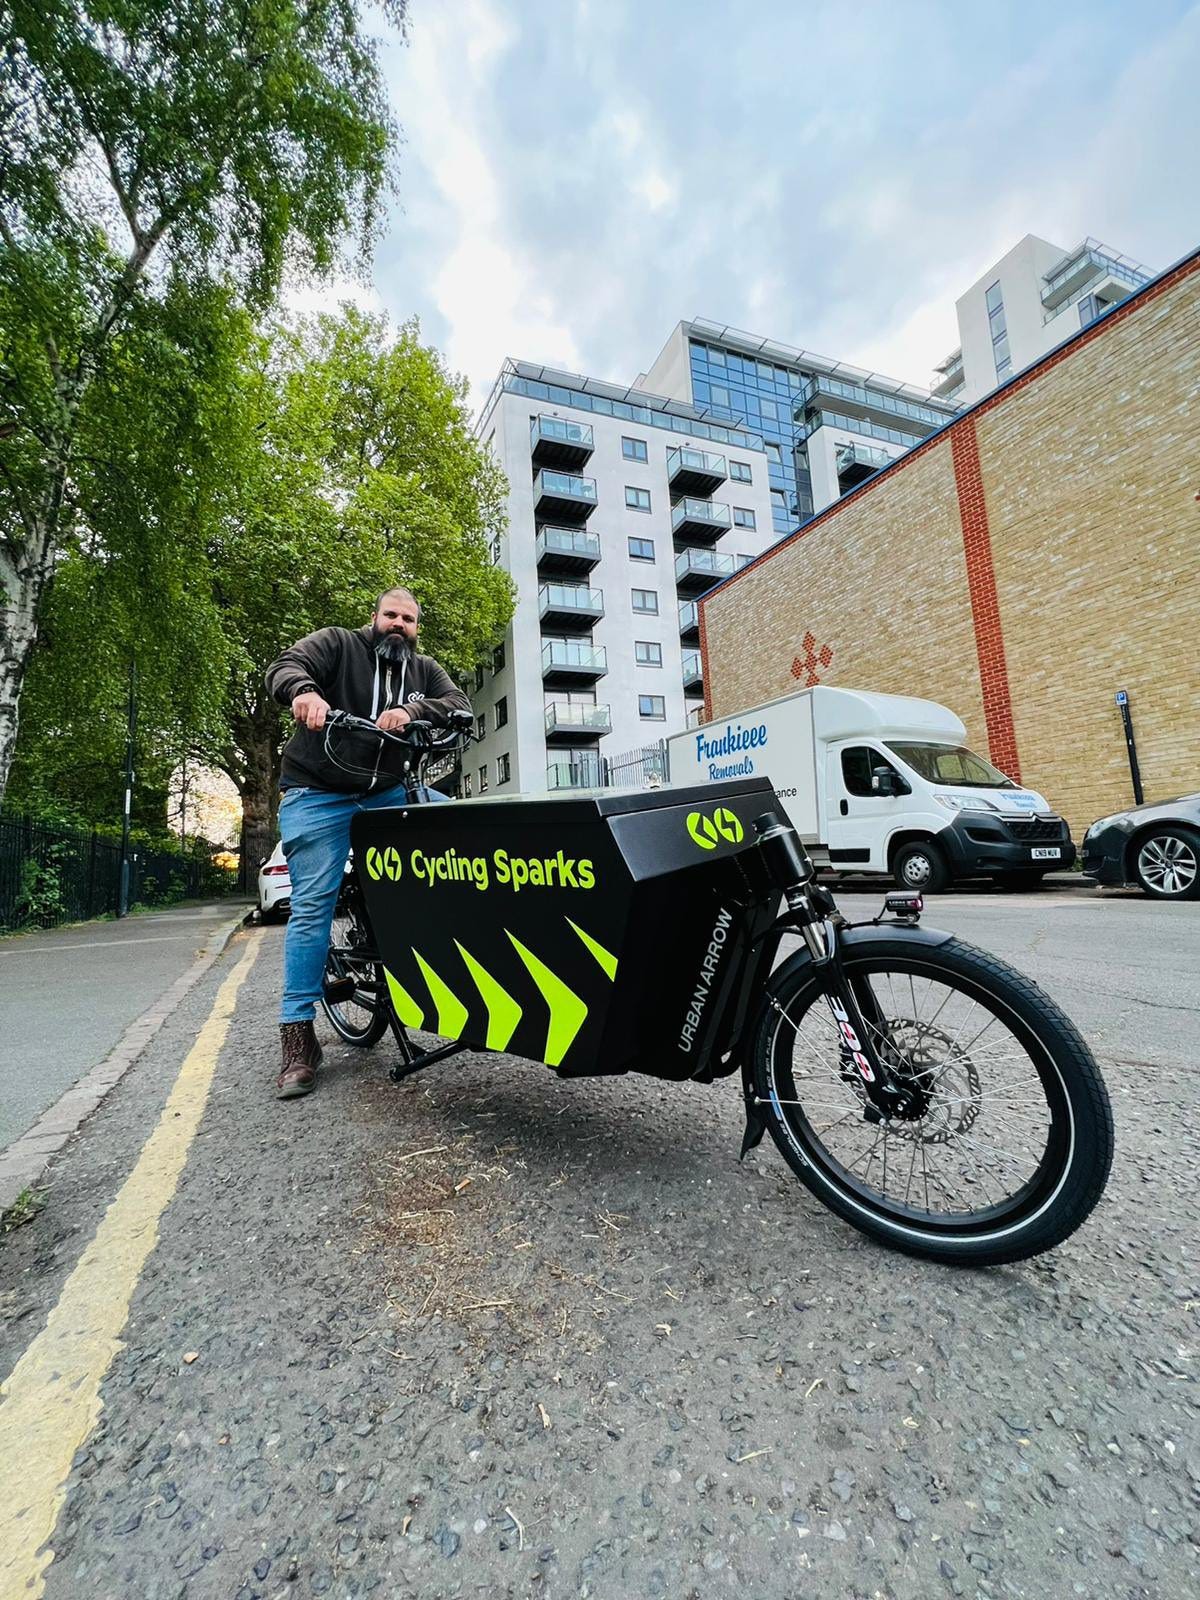 A man poses on the street whilst sitting on his cargobike. On the side of the cargobike is the name of his electrical company